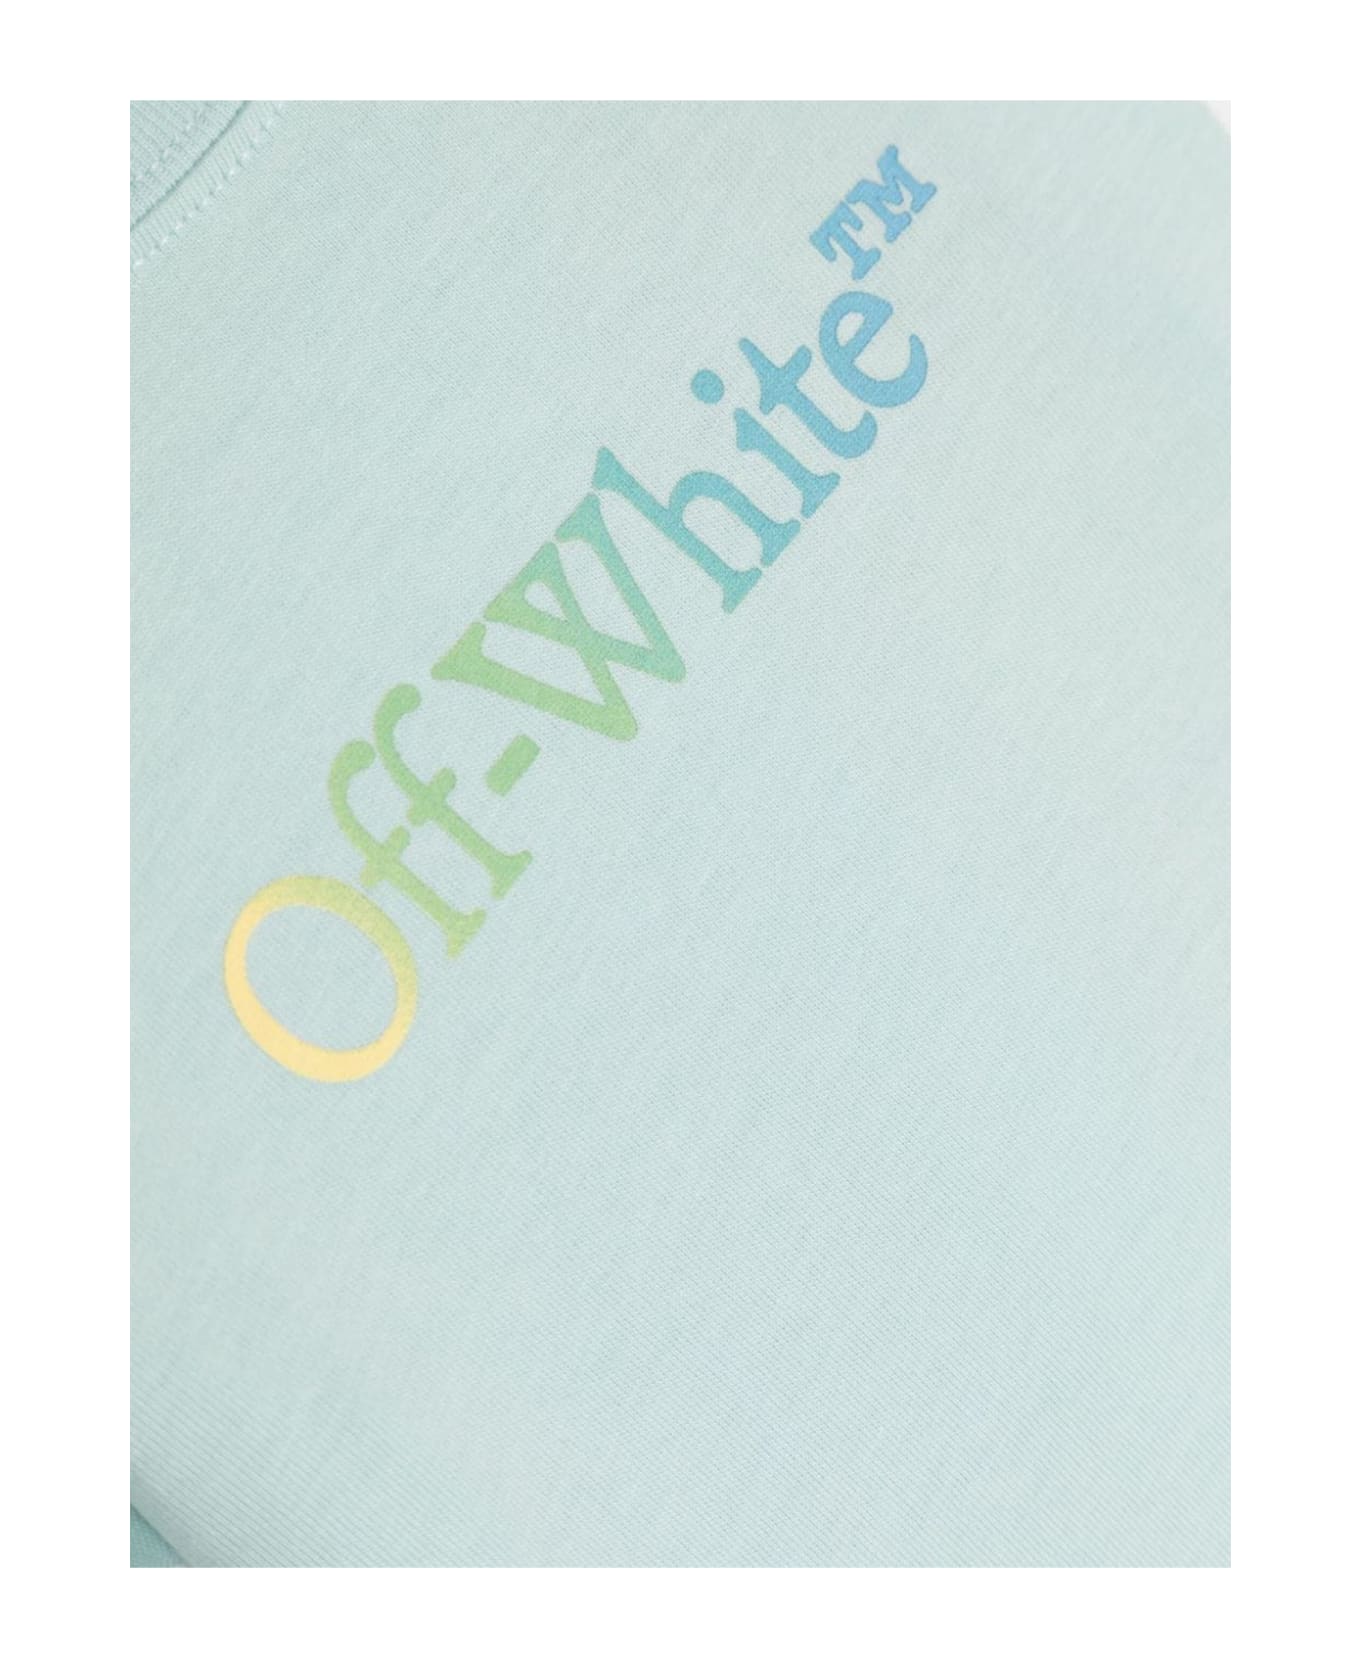 Off-White Off White T-shirts And Polos Clear Blue - Clear Blue